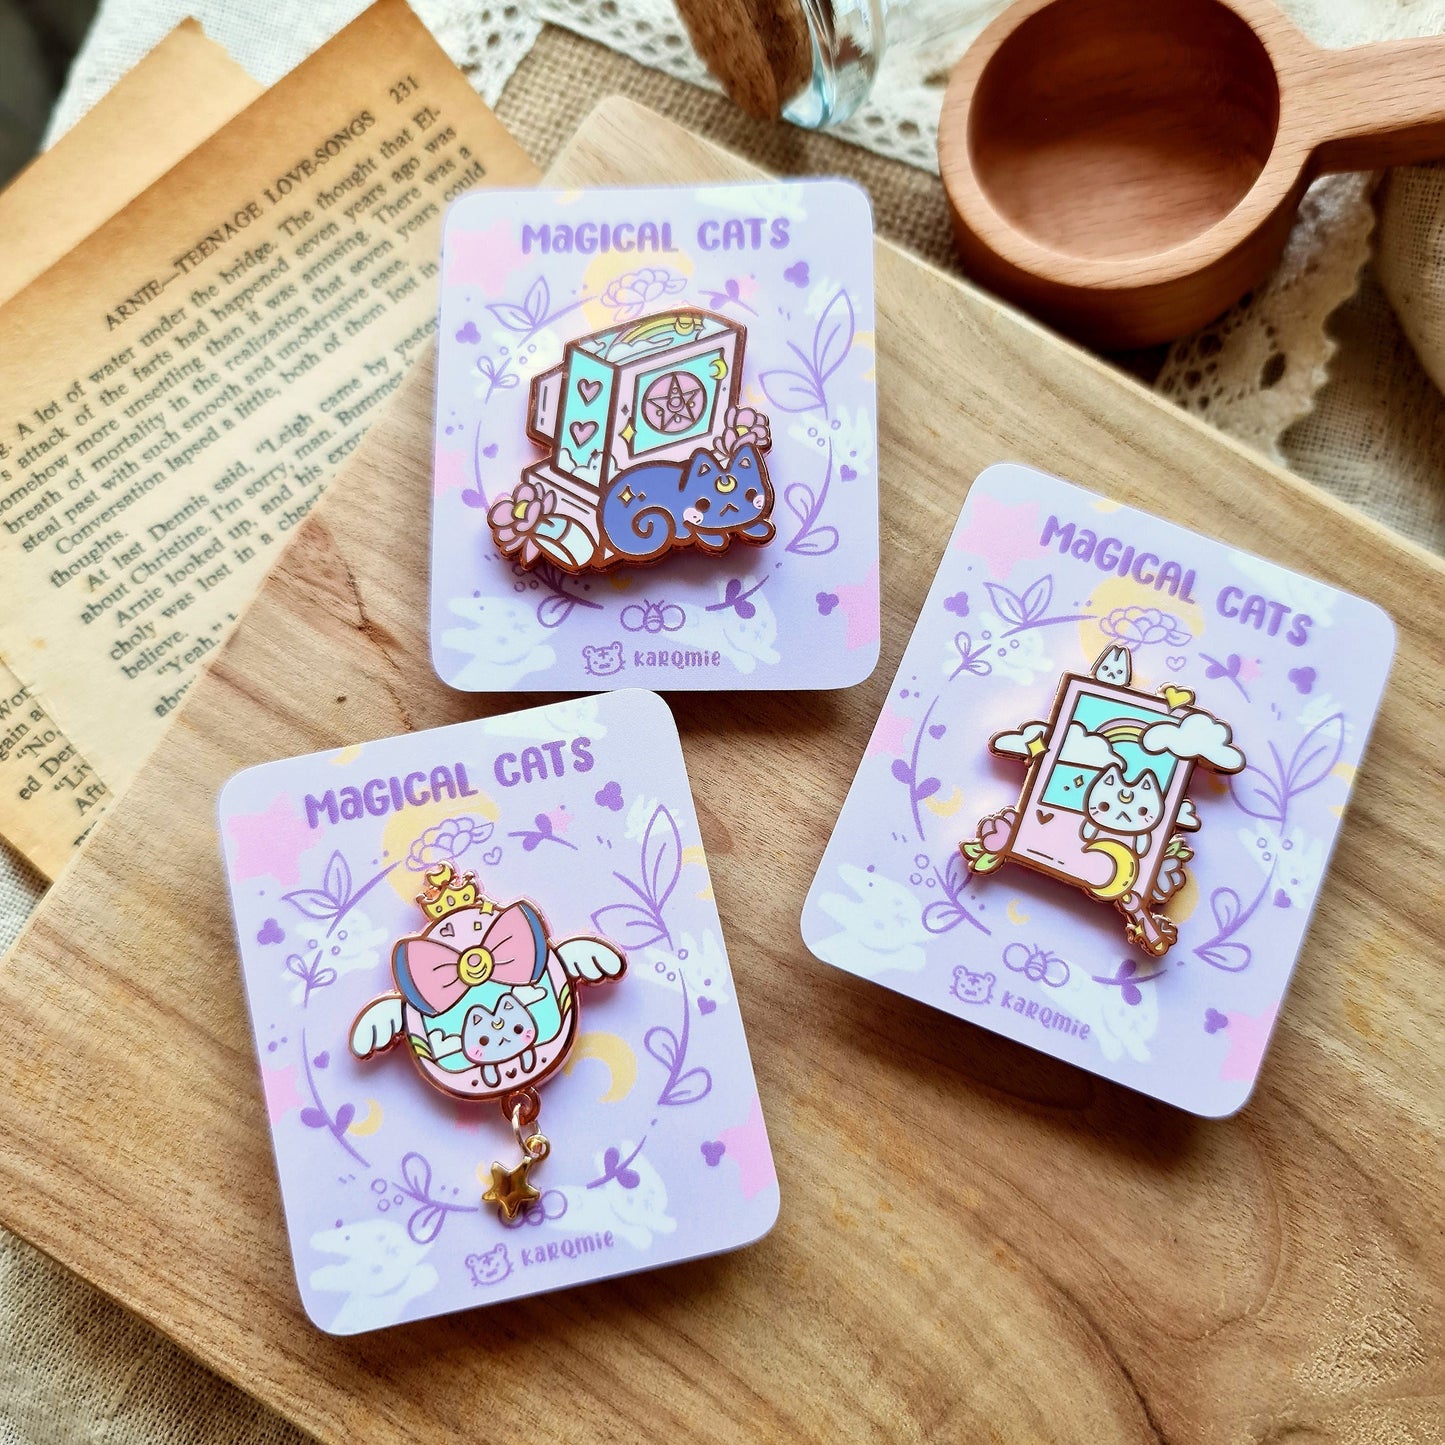 Ships from 23 Sep | Sailor Moon Inspired 90s Magical Cats Enamel Pins ...